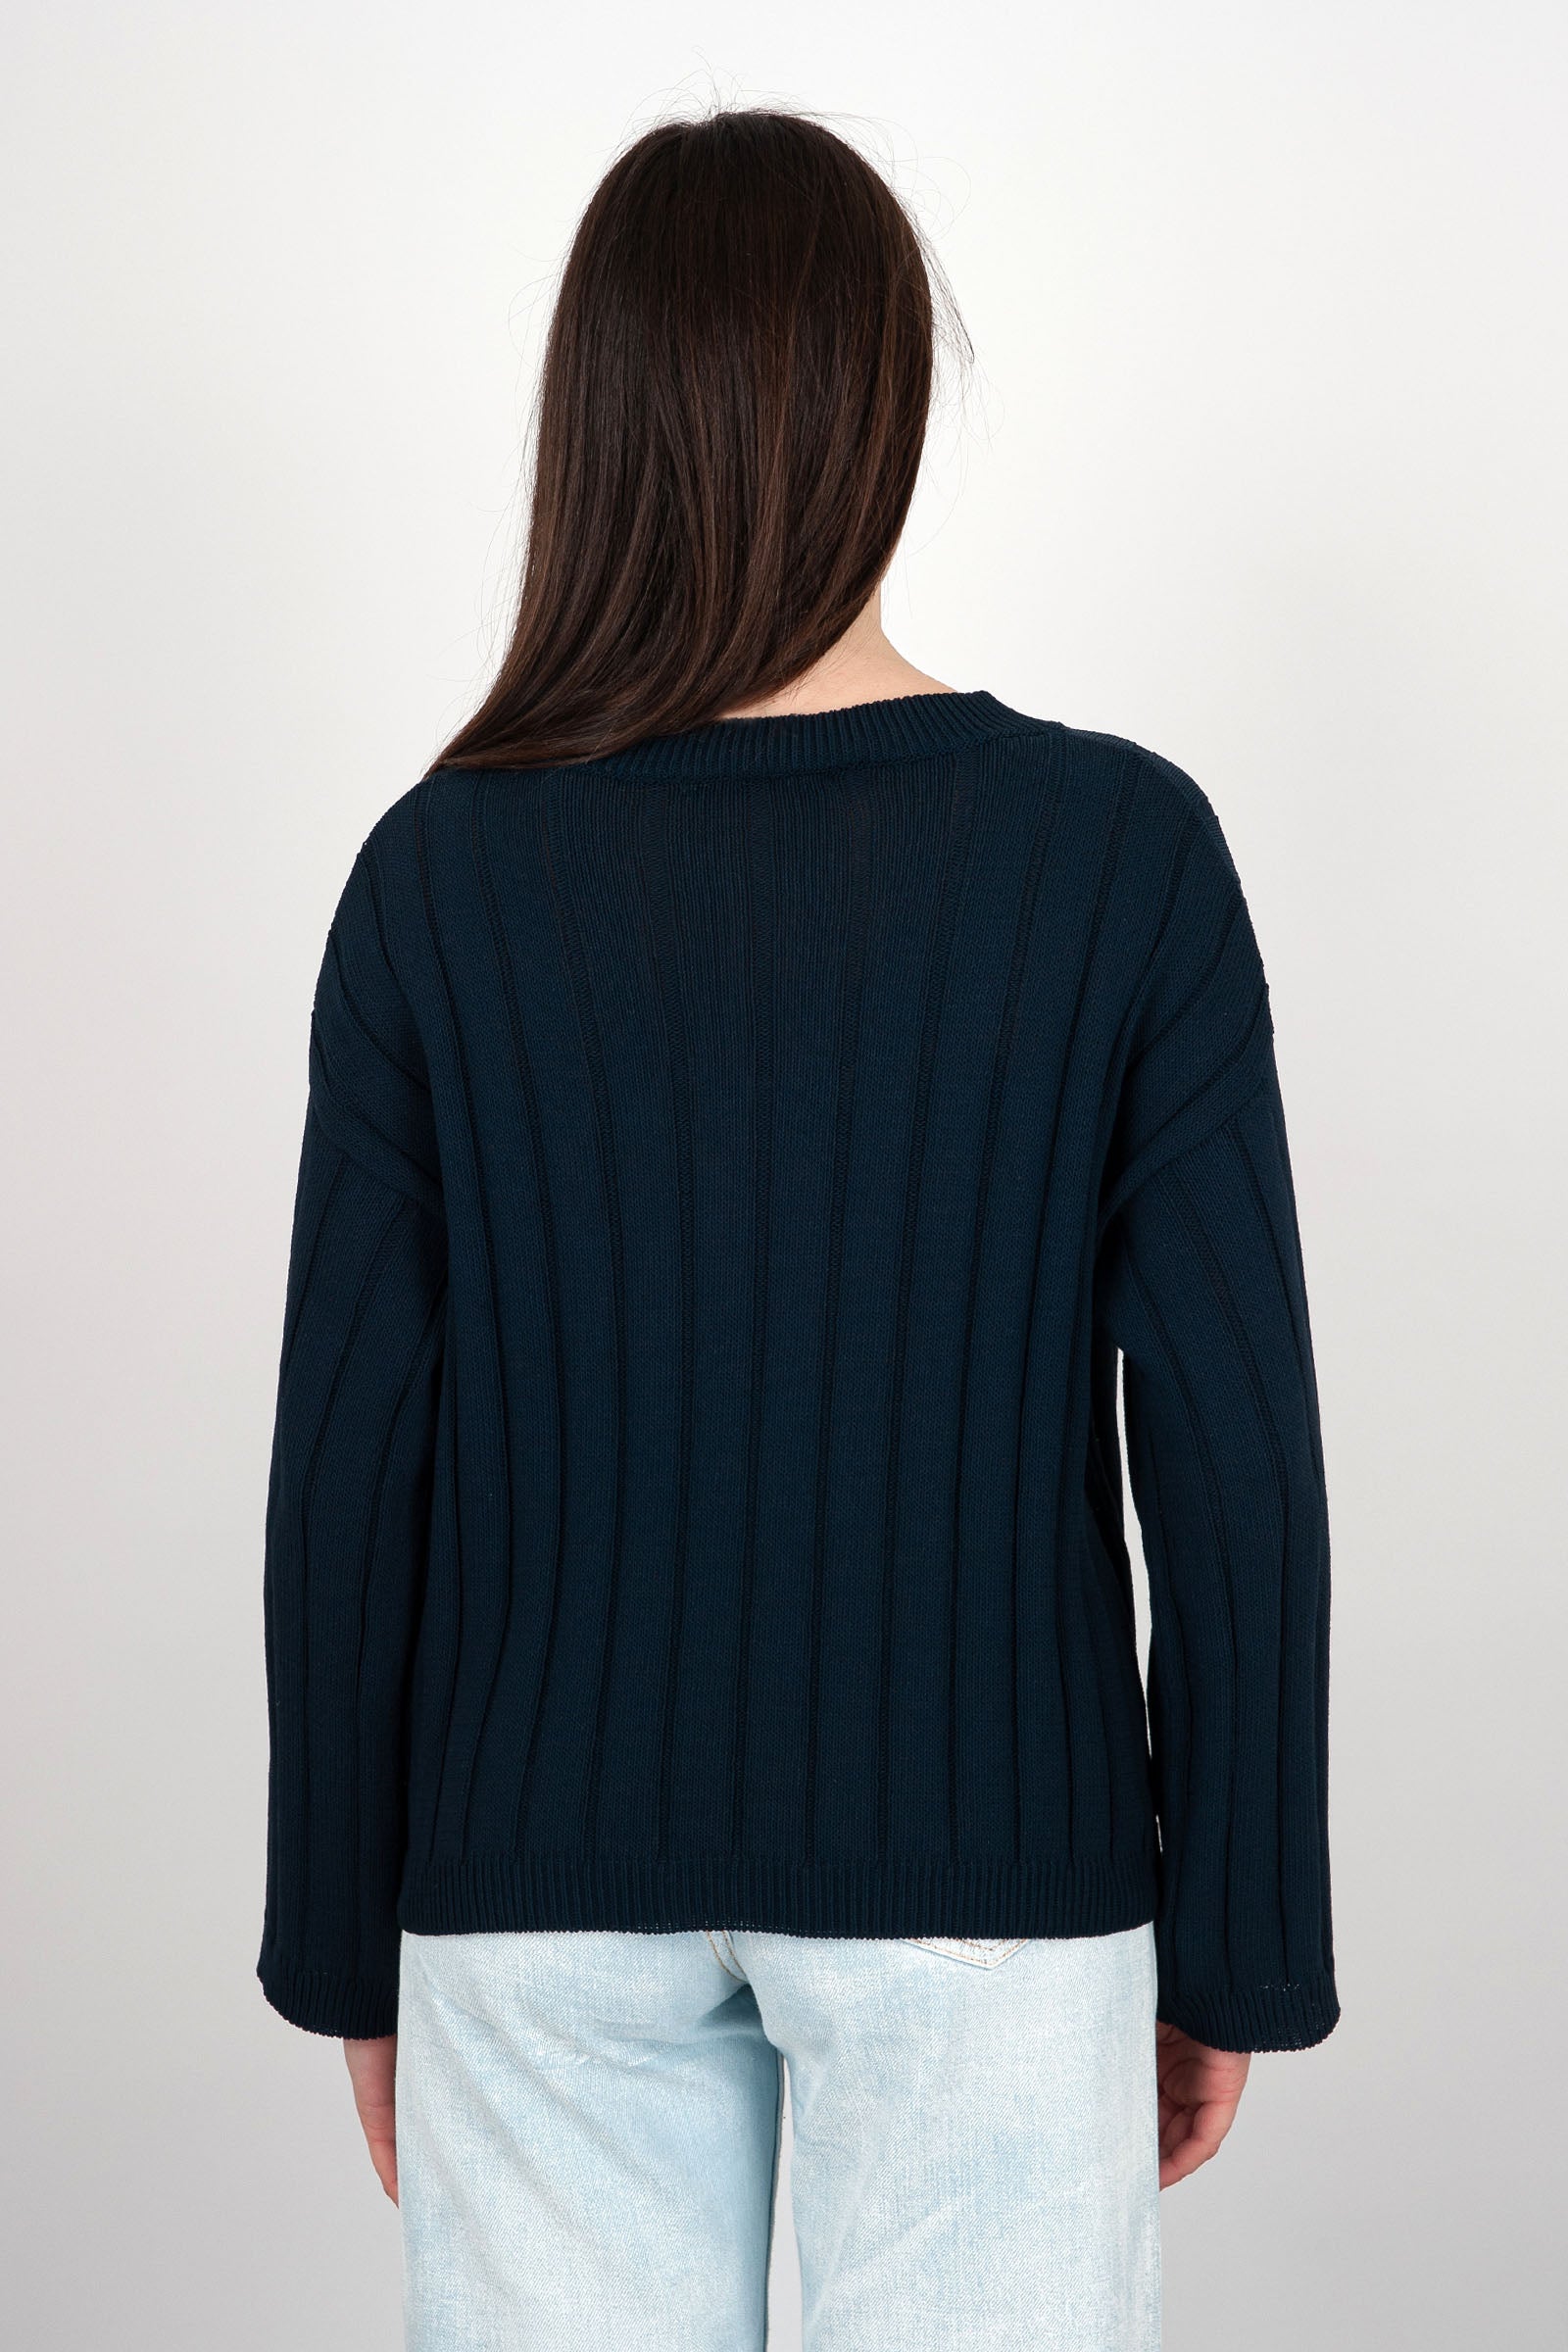 Grifoni Ribbed Cotton Navy Blue Sweater - 4